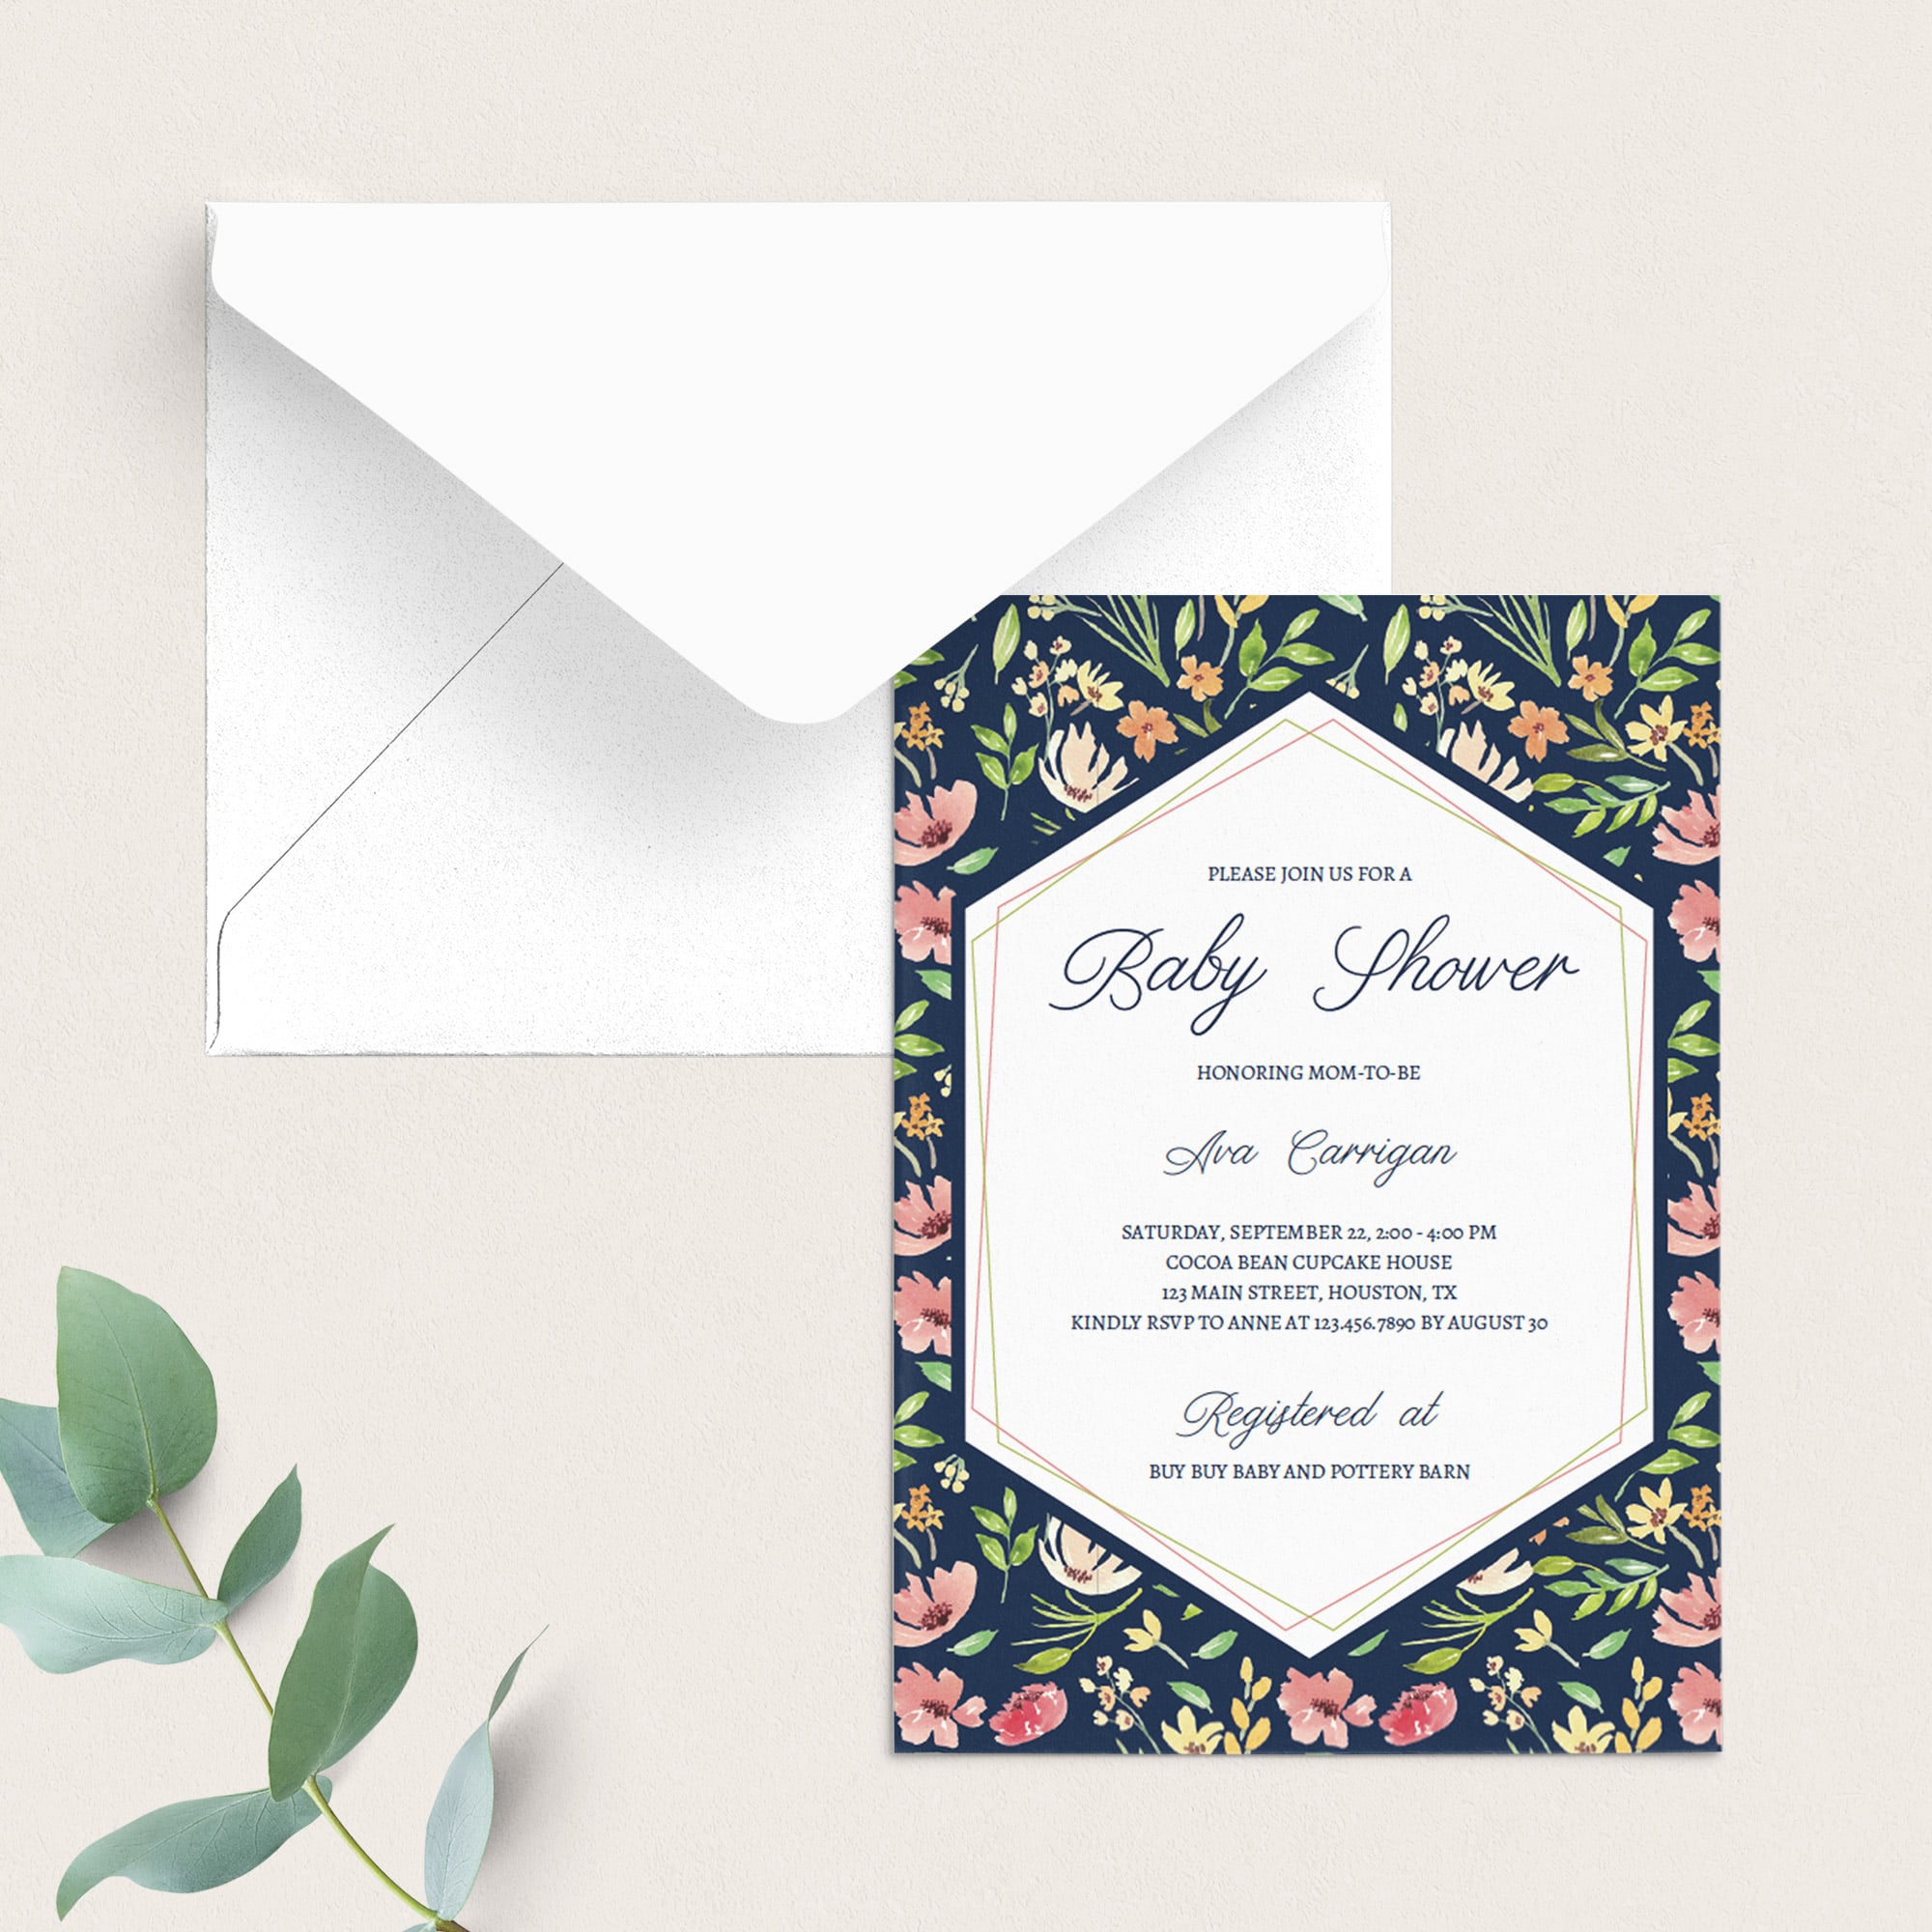 Invitation template for floral babyshower party PDF template by LittleSizzle